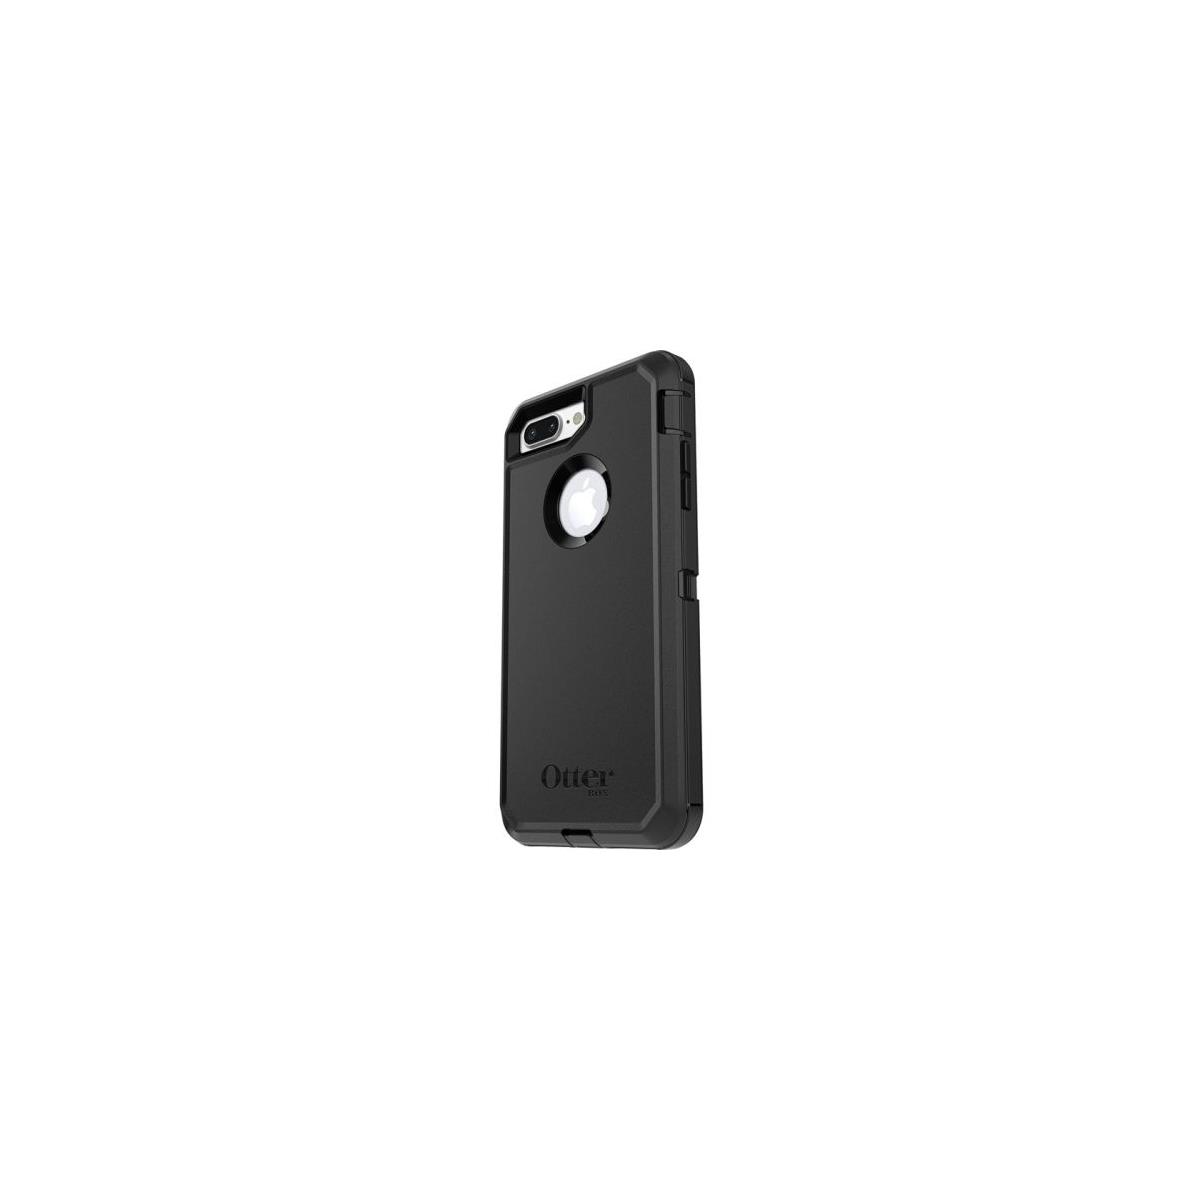 Image of OtterBox Defender Series Pro Pack Case for iPhone 7